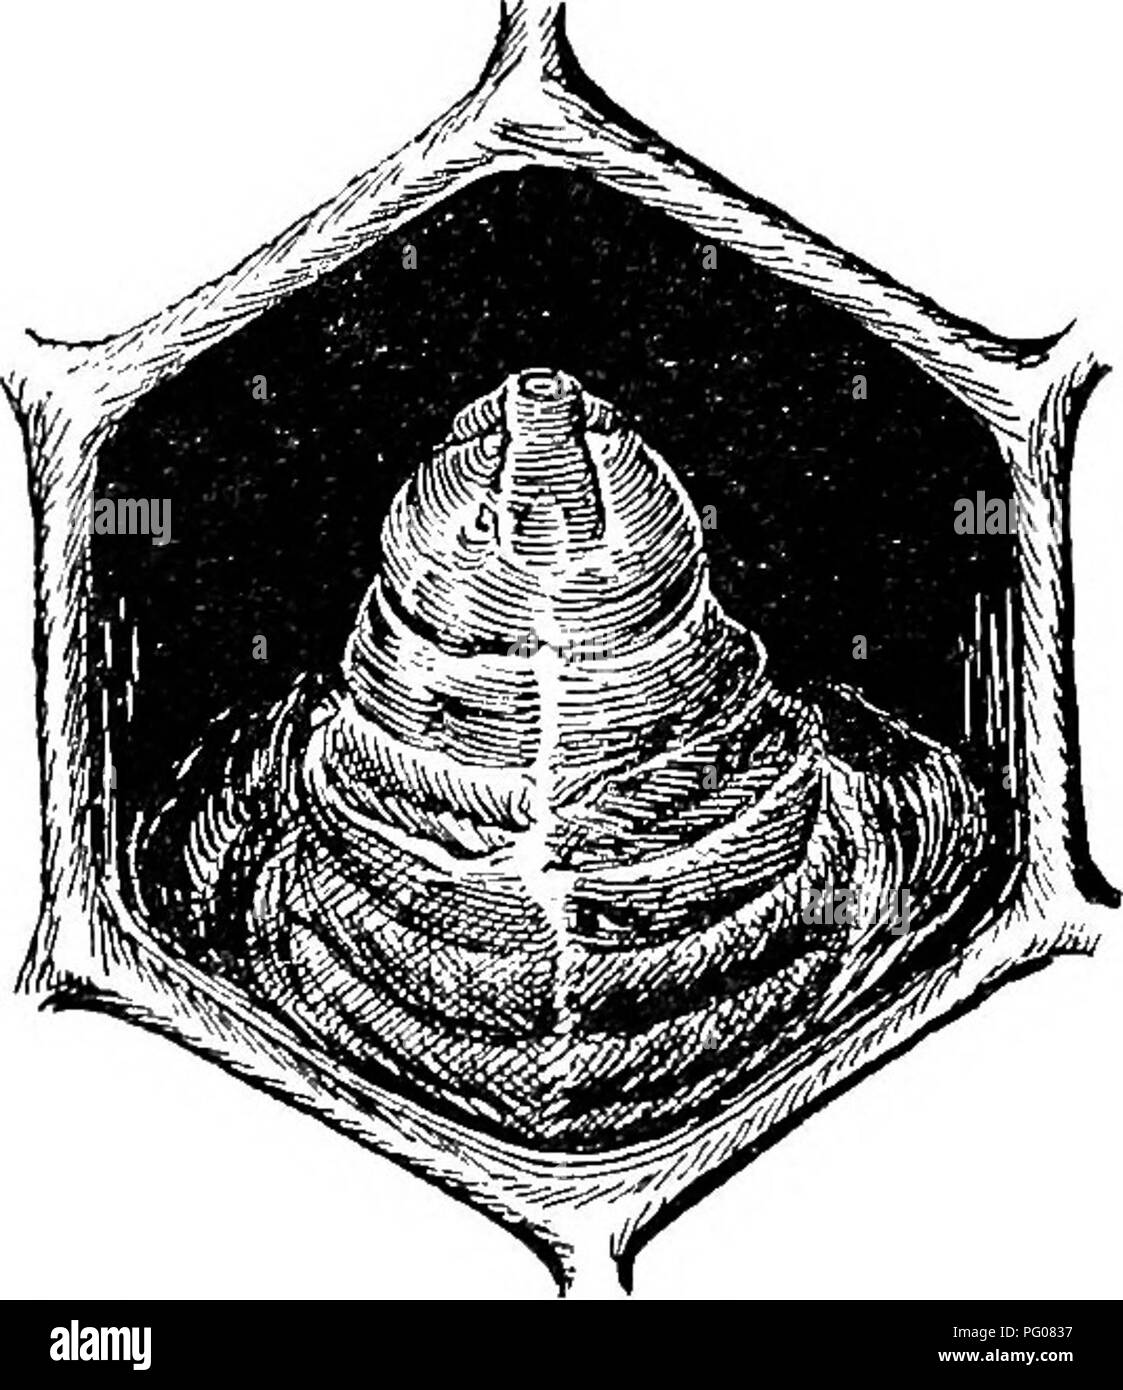 . Diseases of bees. Bees. Fig. 8.—End view of capped cell wliich con- tains a larva dead of sacbrood, being simi- lar to the one shown in figure 9. The cap here is not difierent from a cap of the same age over a healthy larva. (Original.) stage is reached. It is rare to find a pupa dead of sacbrood (PL II, zz). The larv^ that die (fig. 7) are found lying extended lengthwise with the dorsal side on the floor of the cell. They may be found in capped (fig. 8) cells or iu cells which have been ^mcapped (fig. 9), as bees often remove the caps from cells containing dead larvae. Caps that are not rem Stock Photo